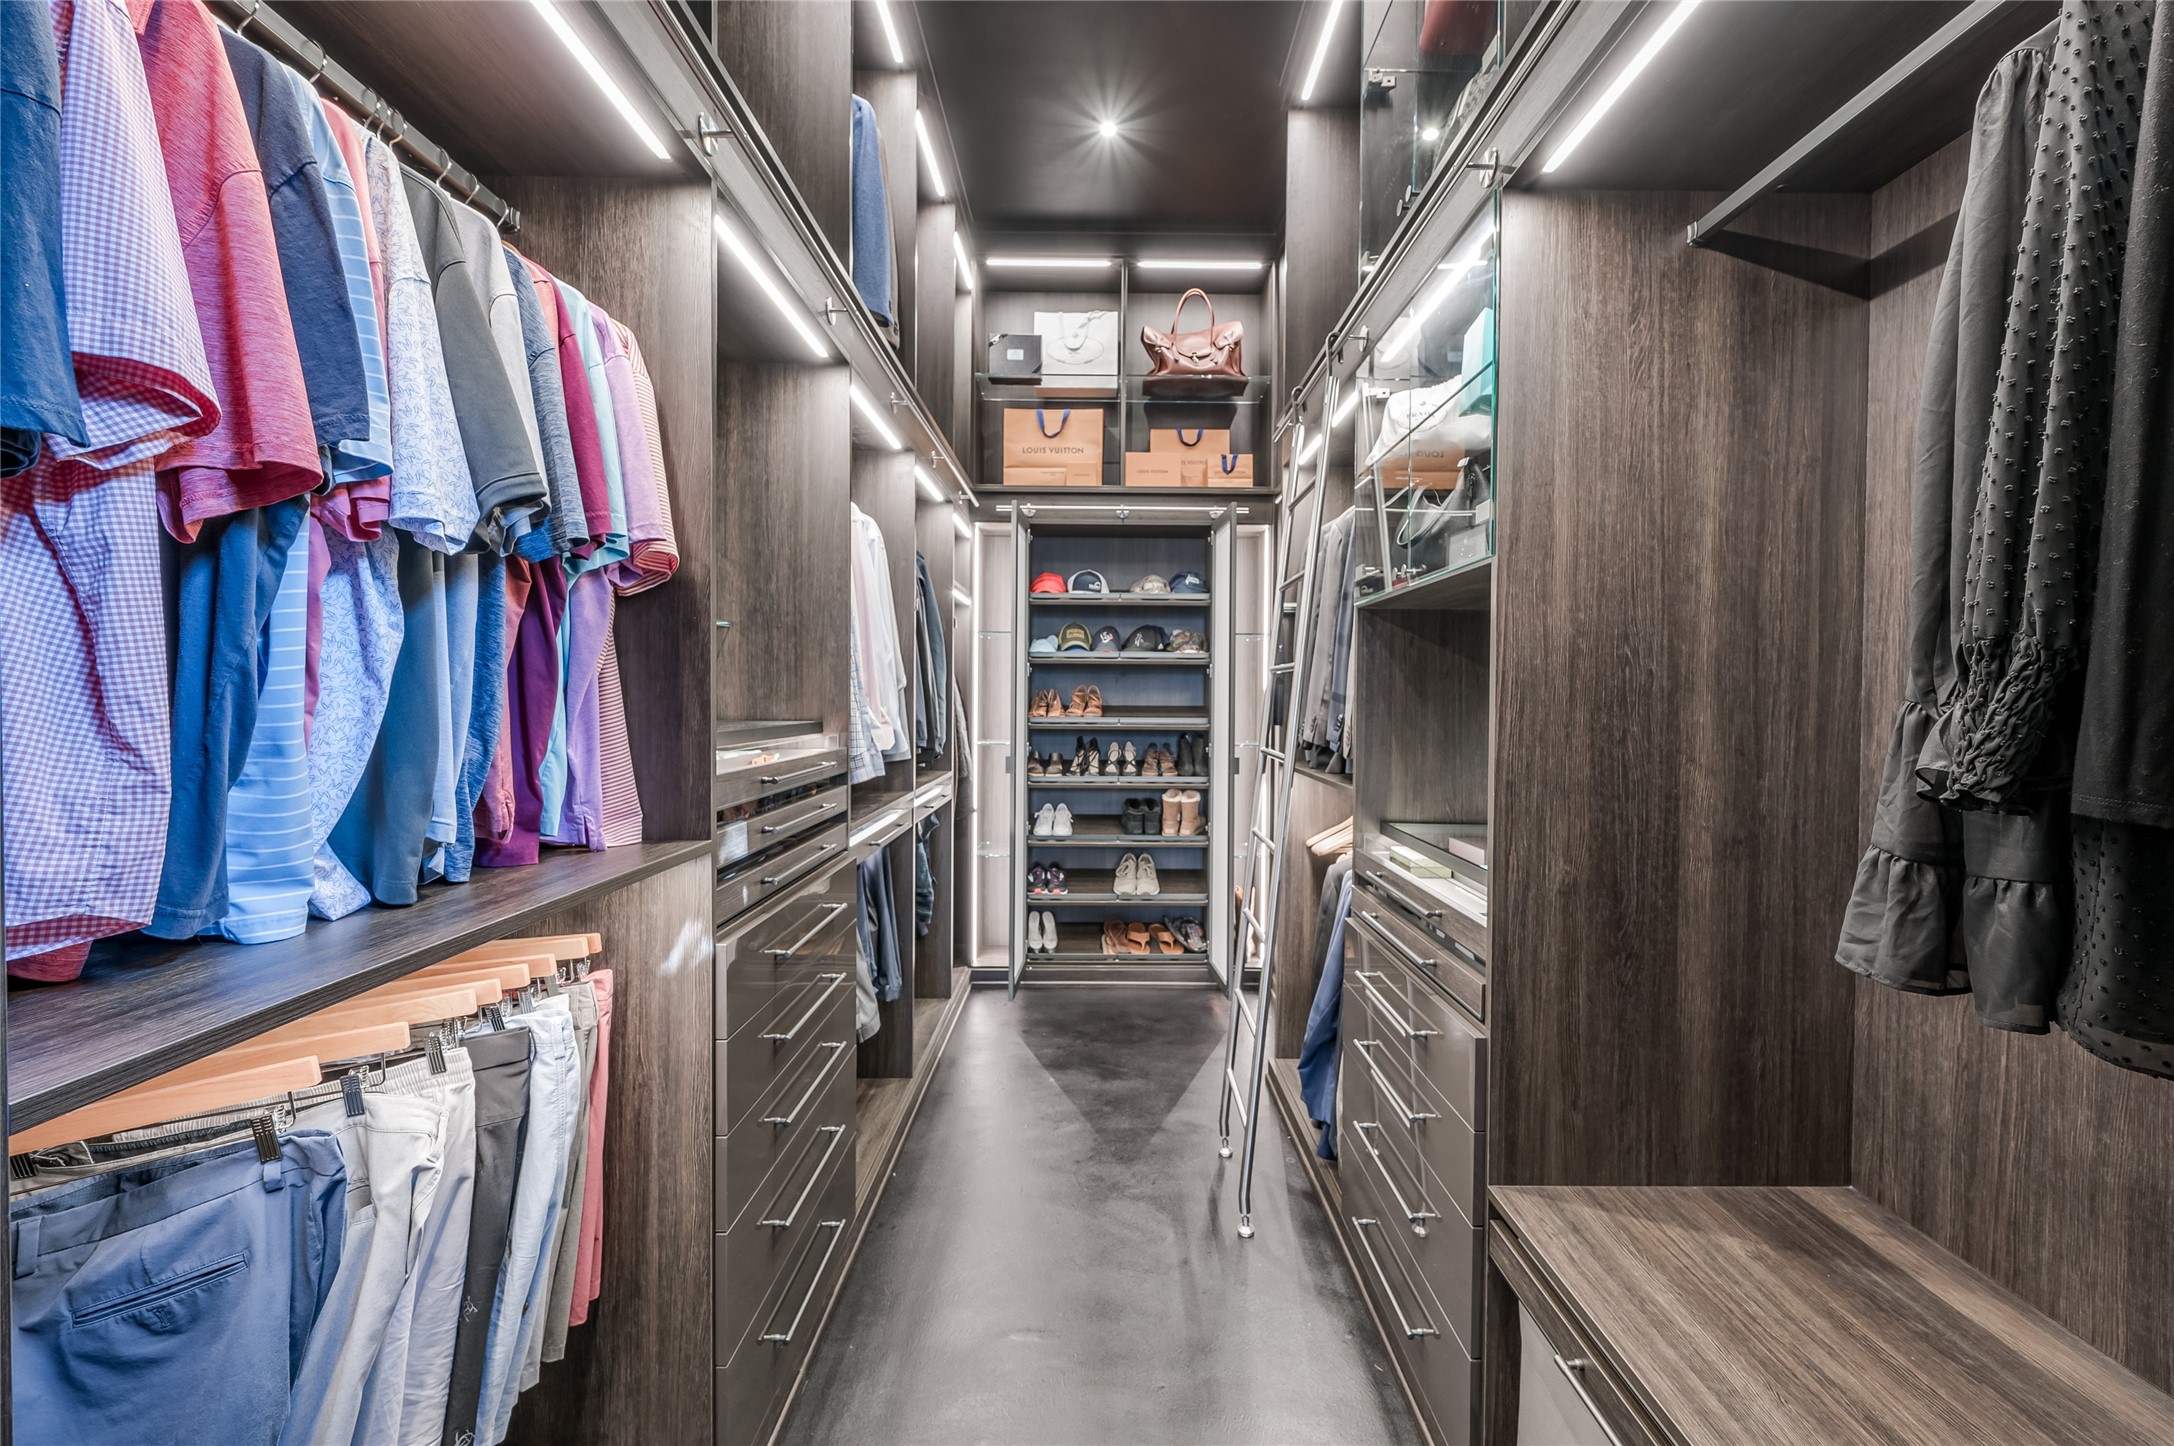 California Closets - A two level custom build with full LED lighting